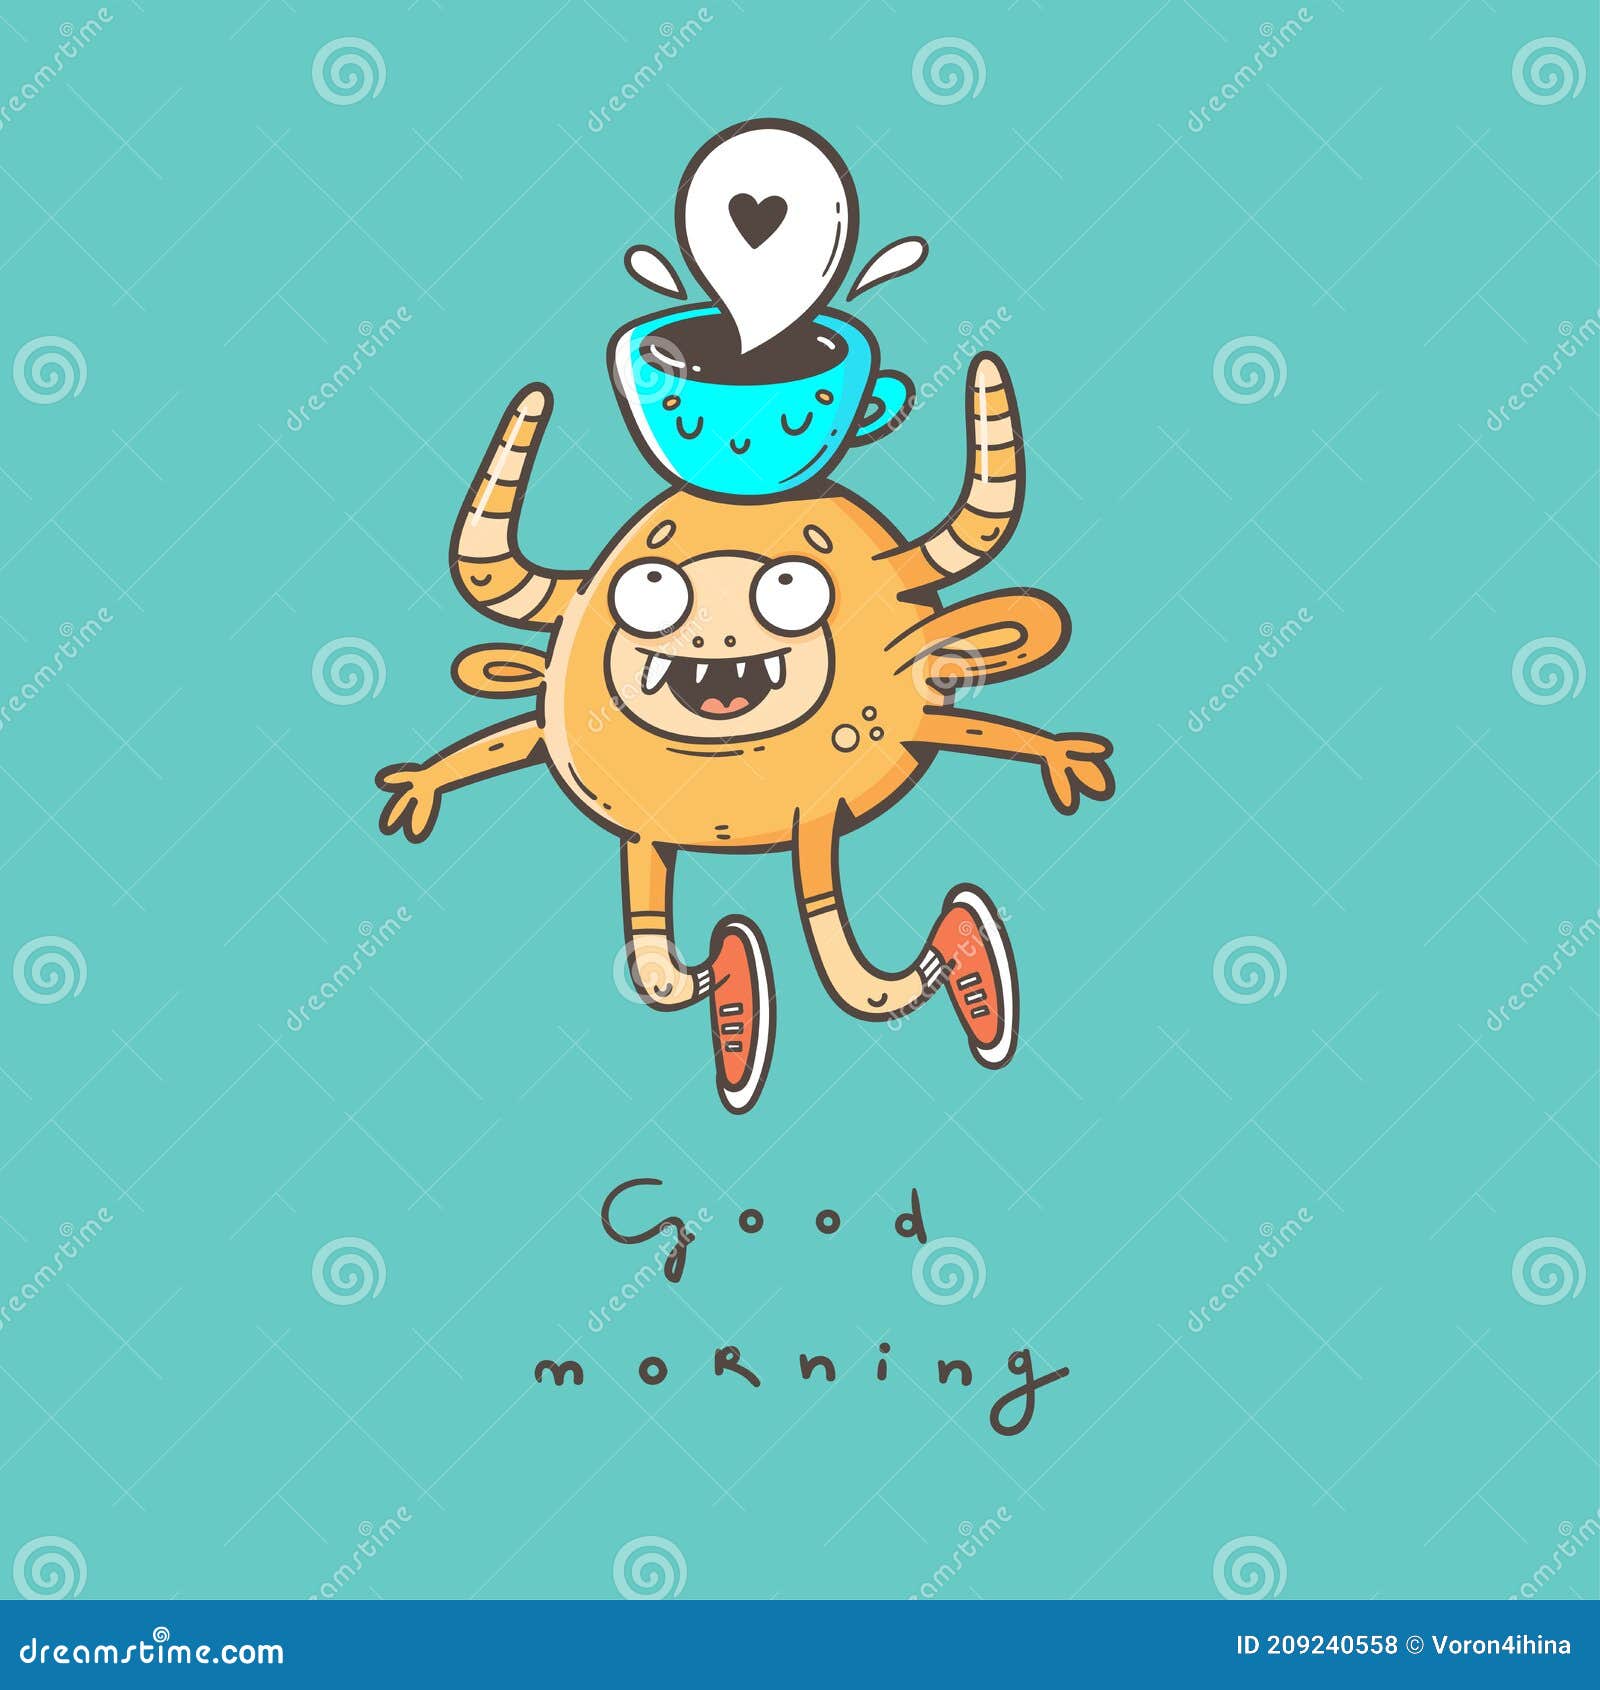 Card with Cute Cartoon Monster and Cup of Coffee. Good Morning Wishes. Funny  Doodle Creature Print Stock Vector - Illustration of cheerfulness, happy:  209240558